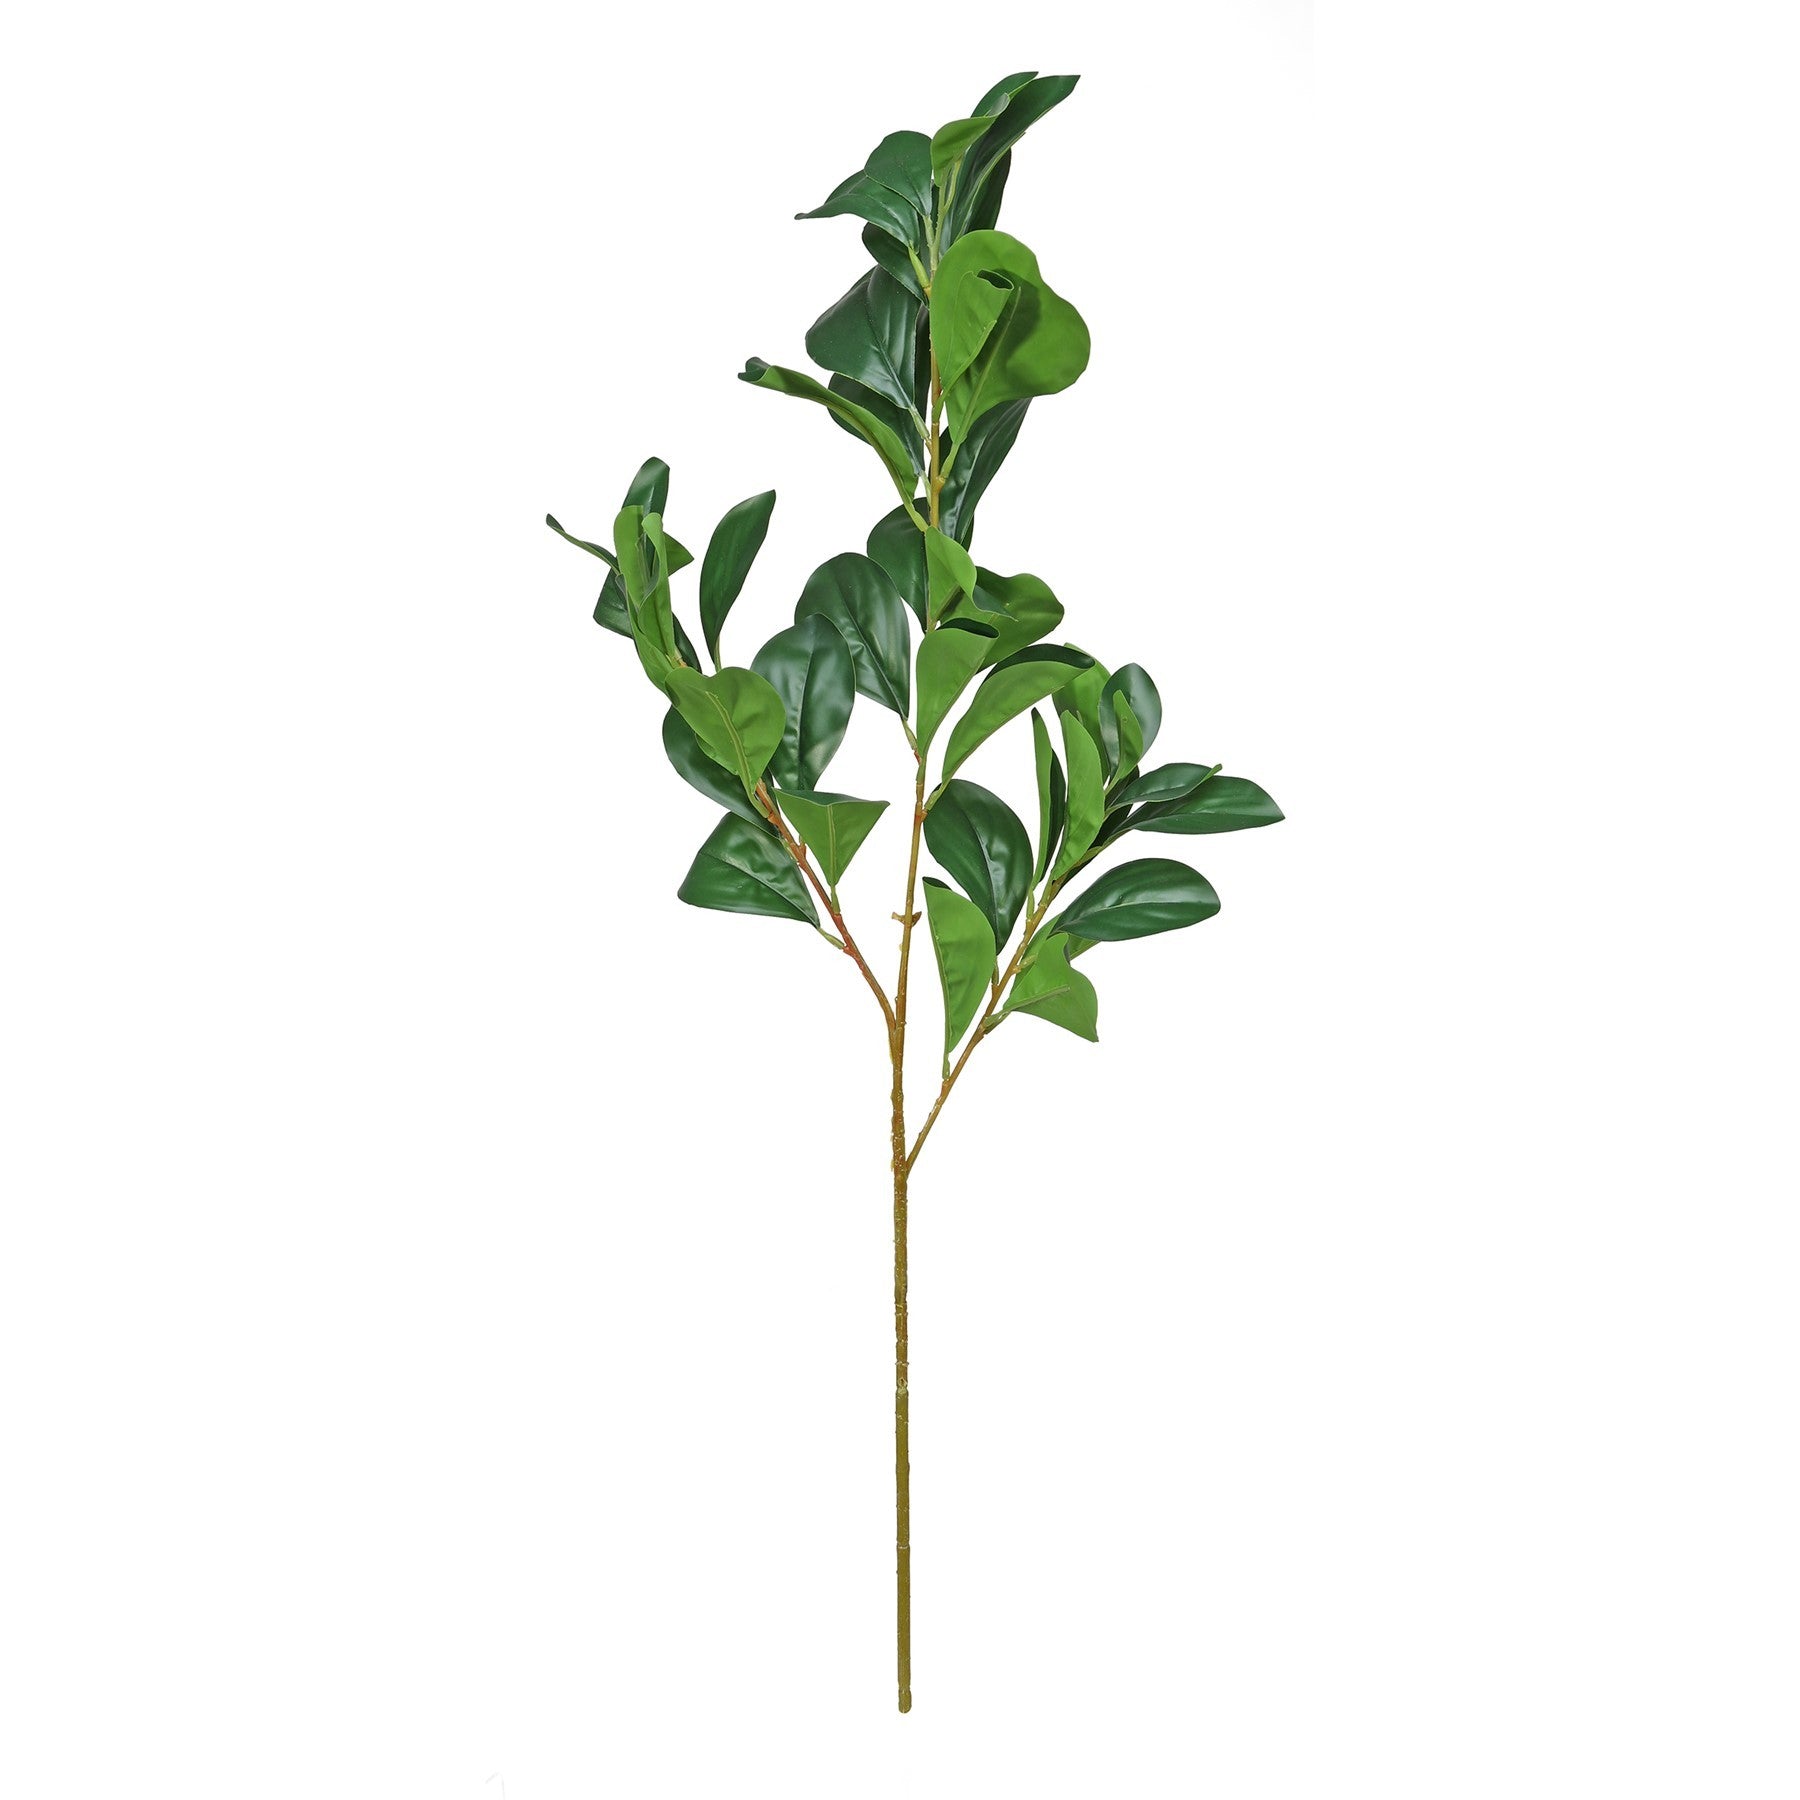 View Essential Green Hard Ruscus information